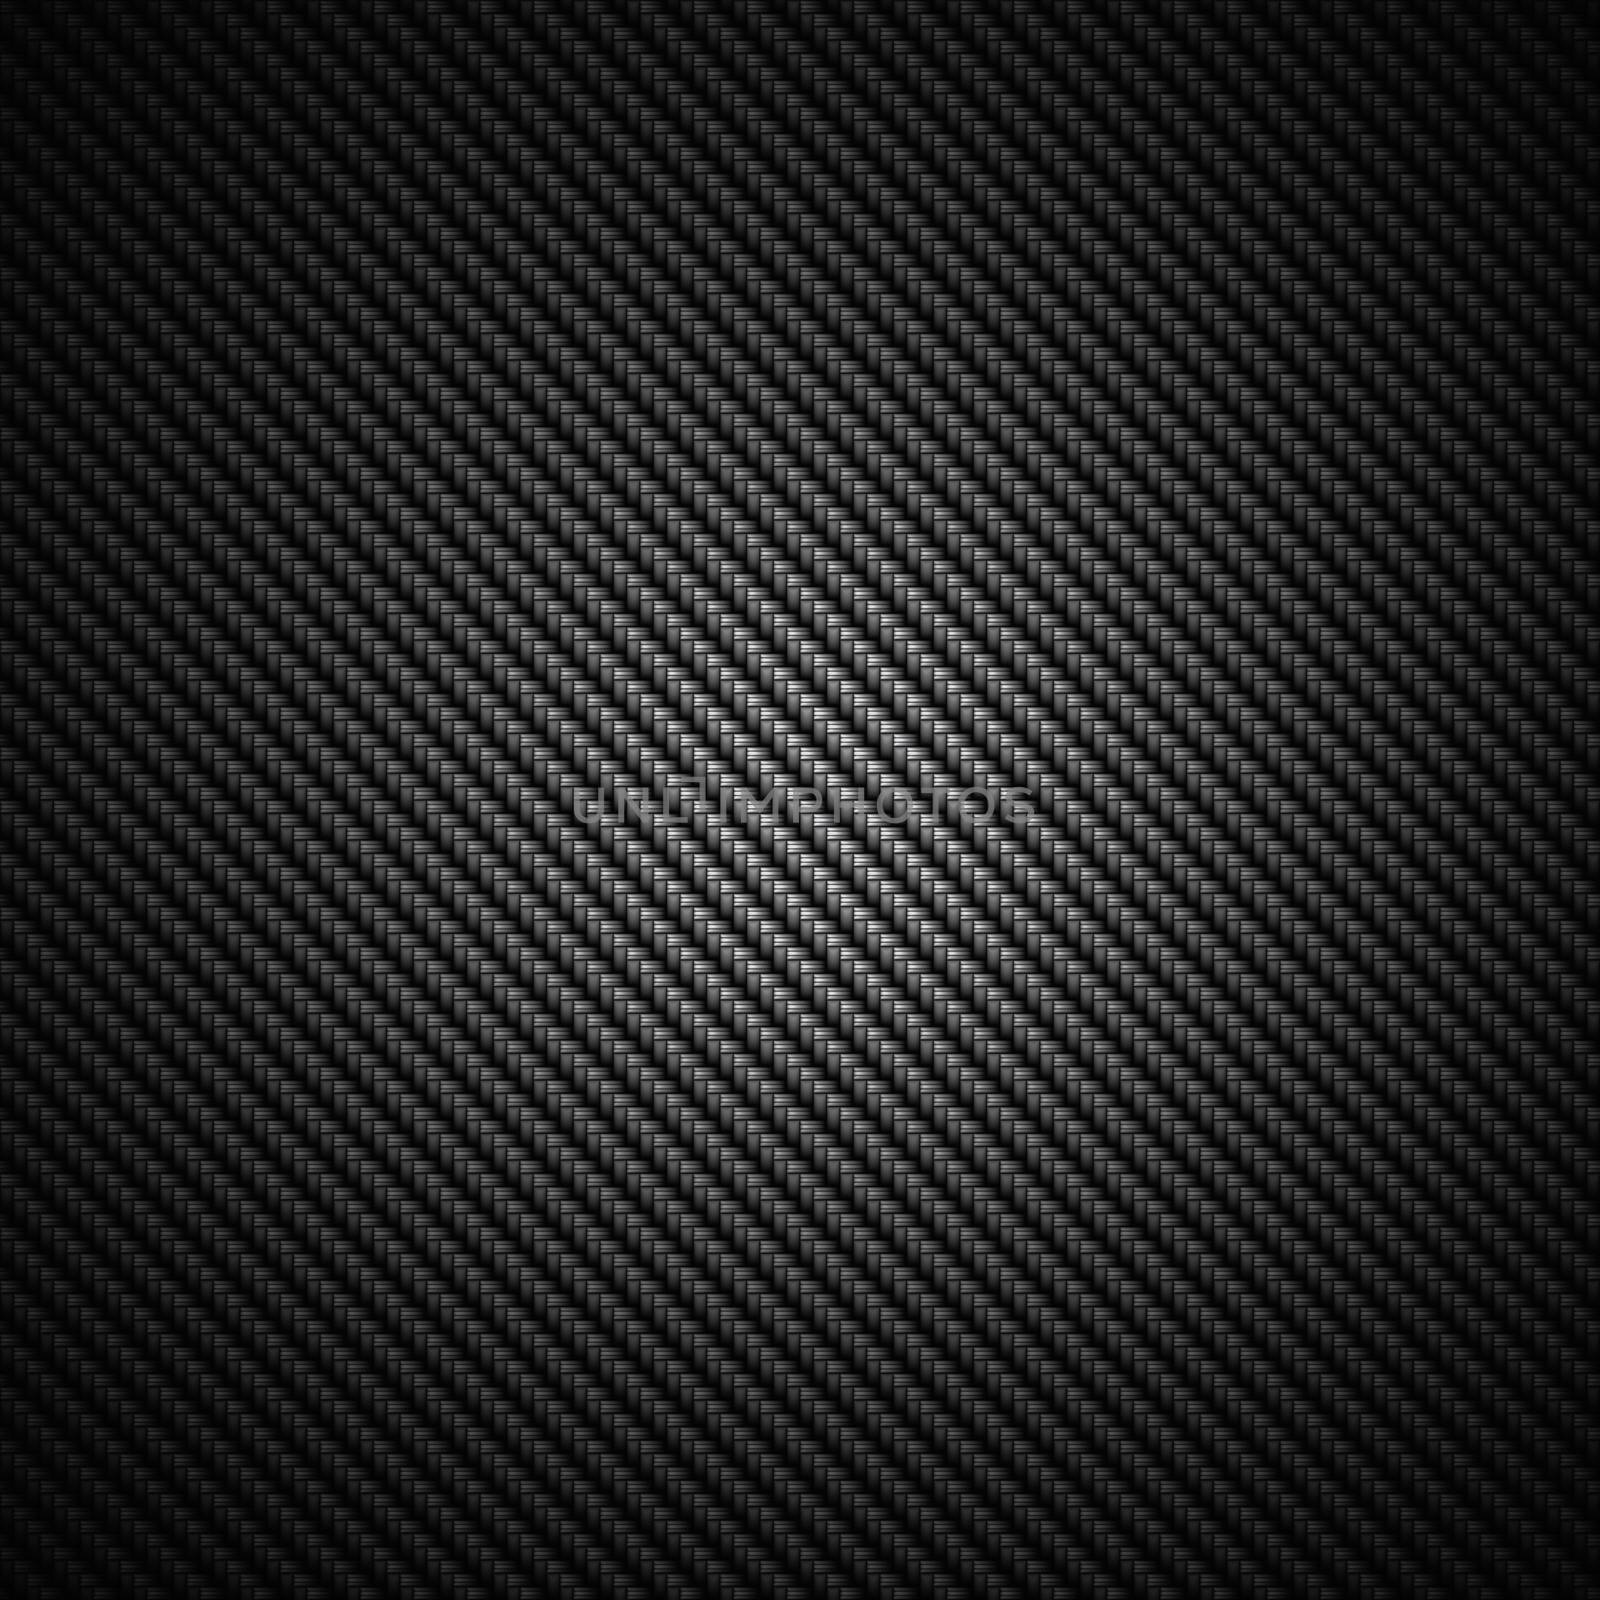 A realistic dark carbon fiber weave background or texture by Attila